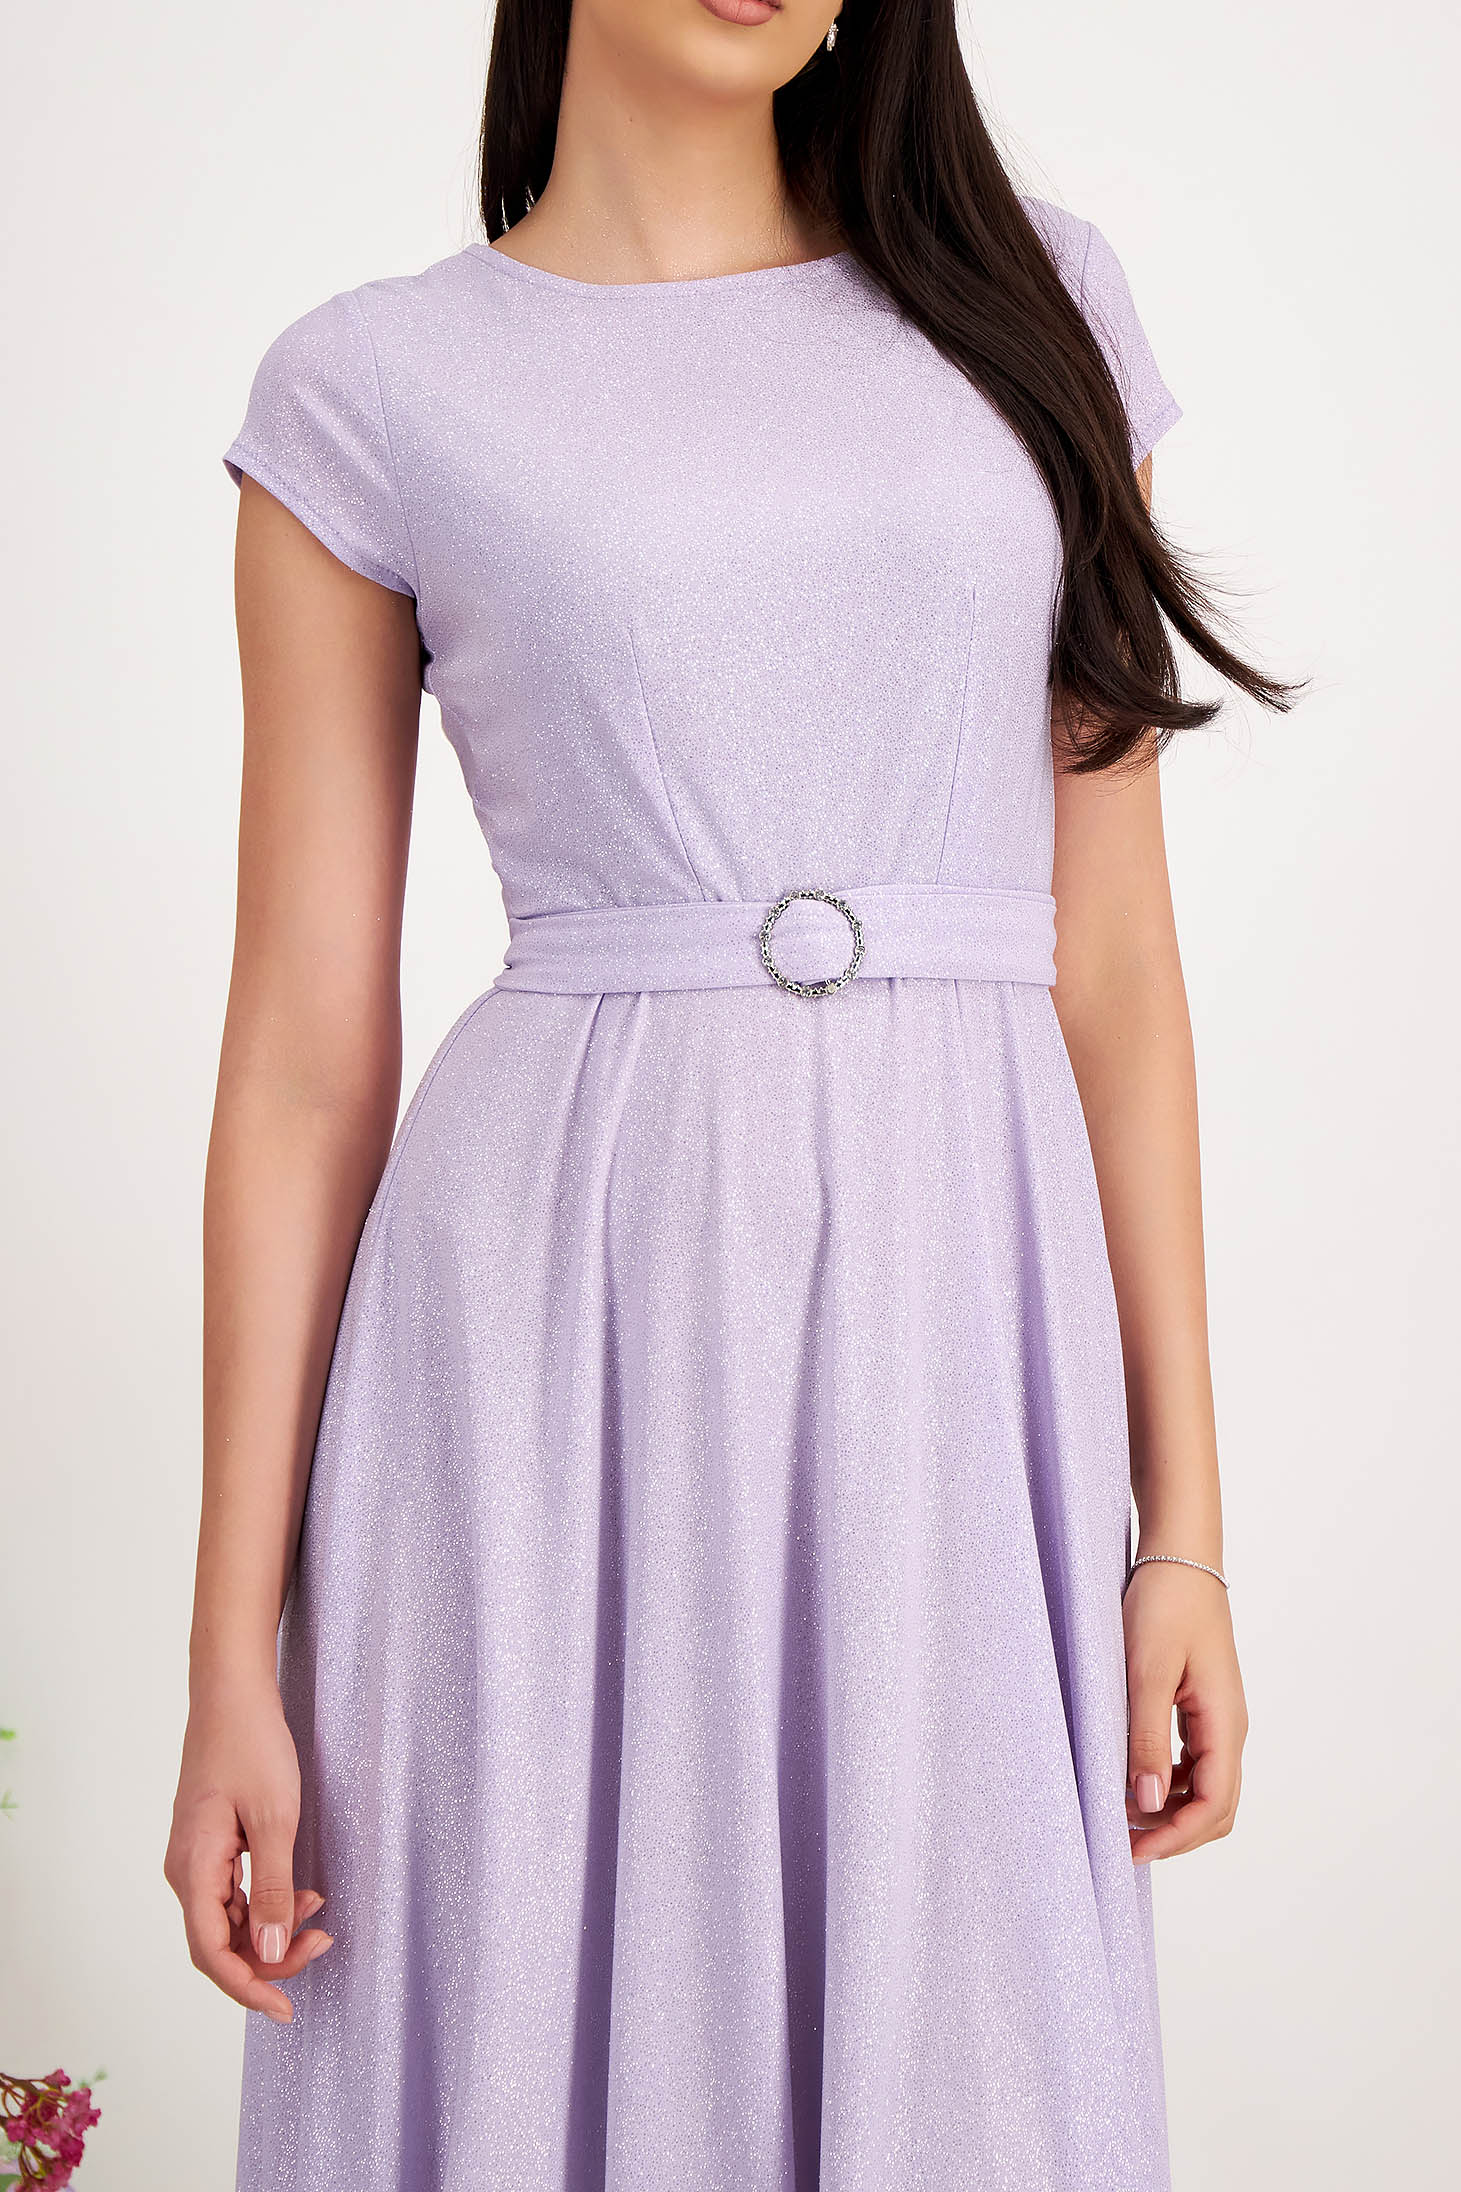 Lycra Dress with Lilac Glitter in Flared Style with Waist Elastic - StarShinerS 3 - StarShinerS.com